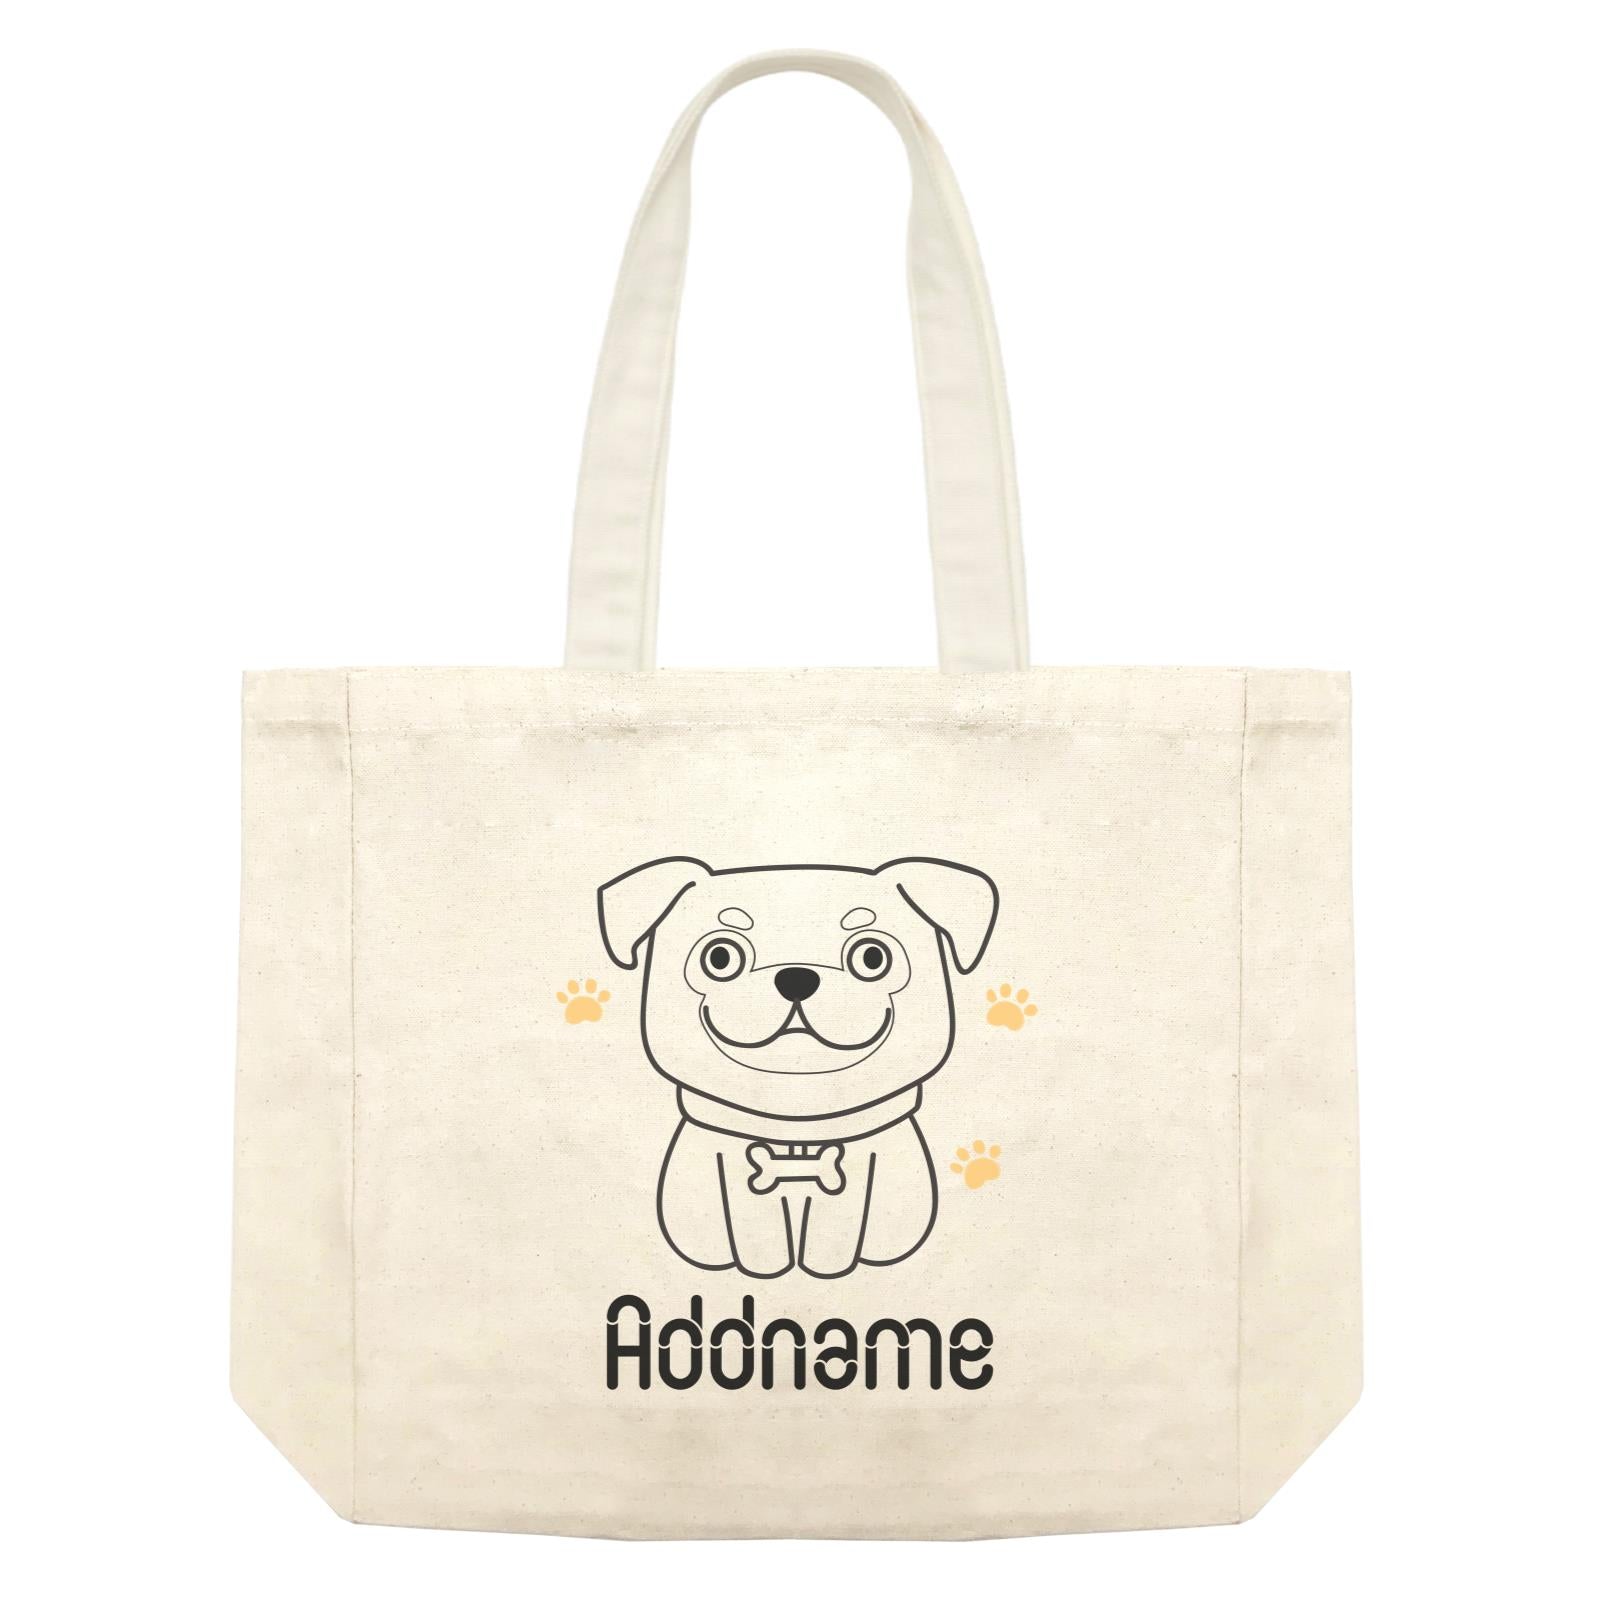 Coloring Outline Cute Hand Drawn Animals Dogs Pug Addname Shopping Bag